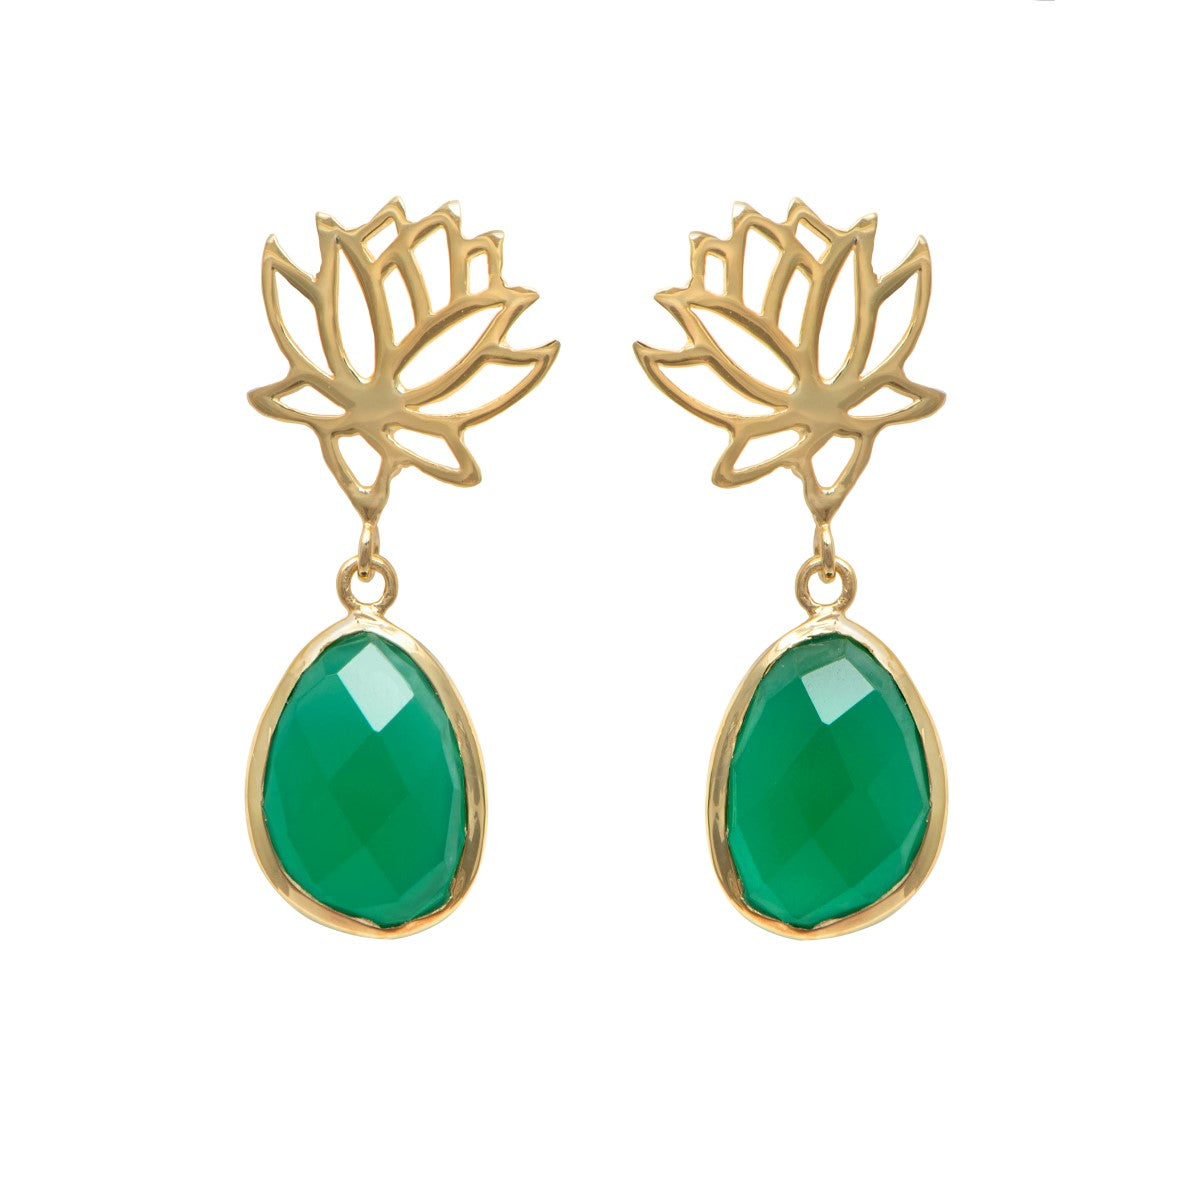 Lotus Earrings in Gold Plated Sterling Silver with a Green Onyx Gemstone Drop